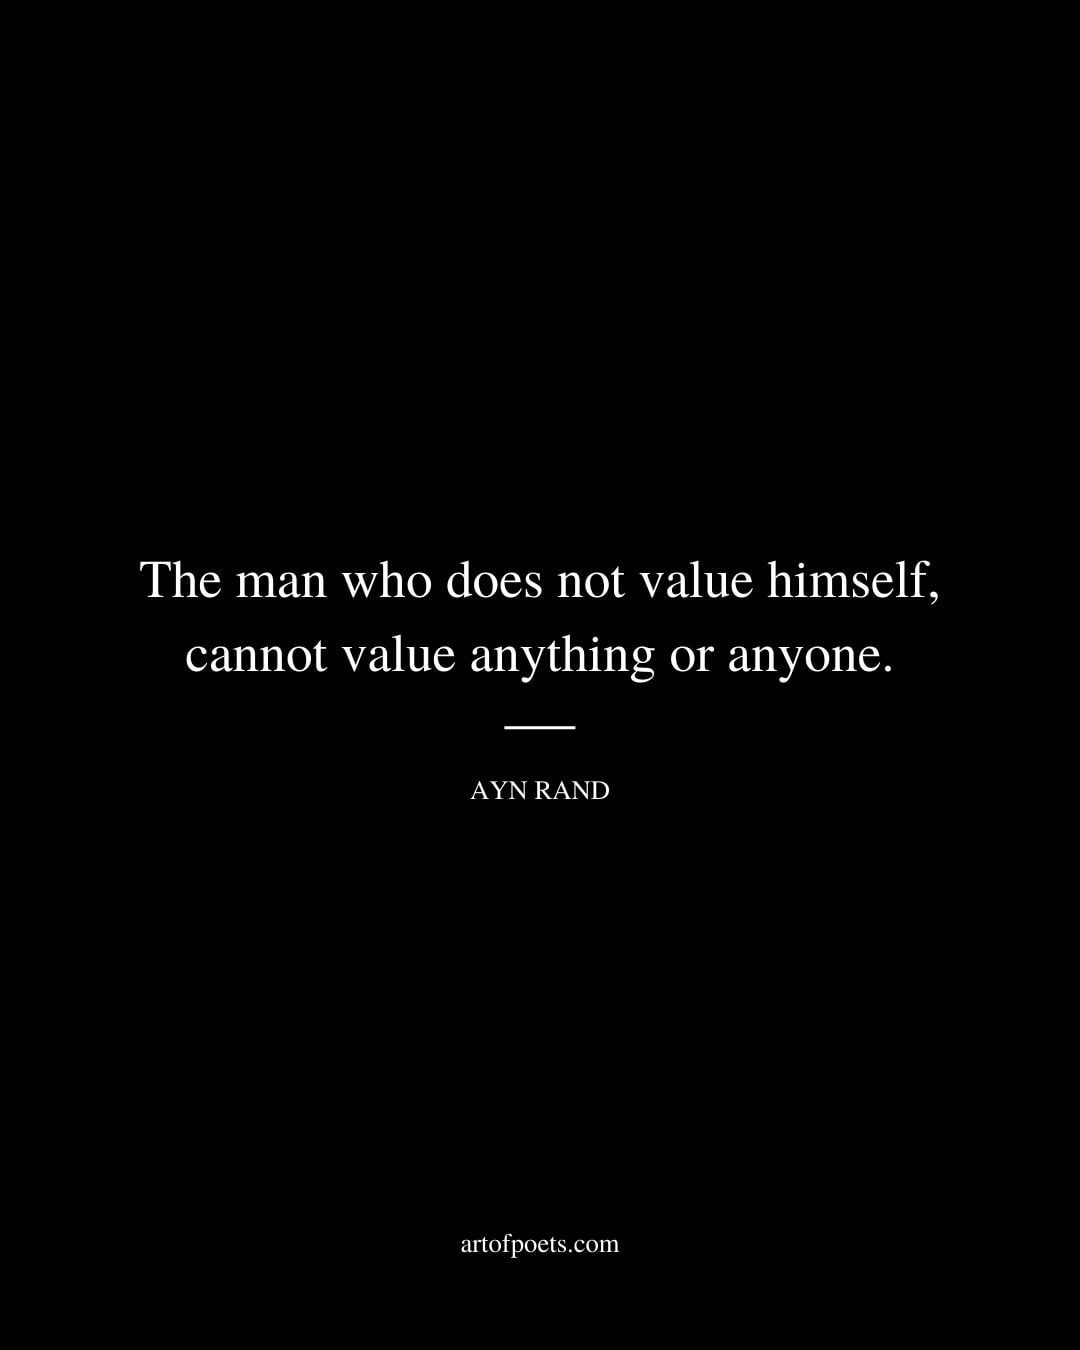 The man who does not value himself cannot value anything or anyone. Ayn Rand